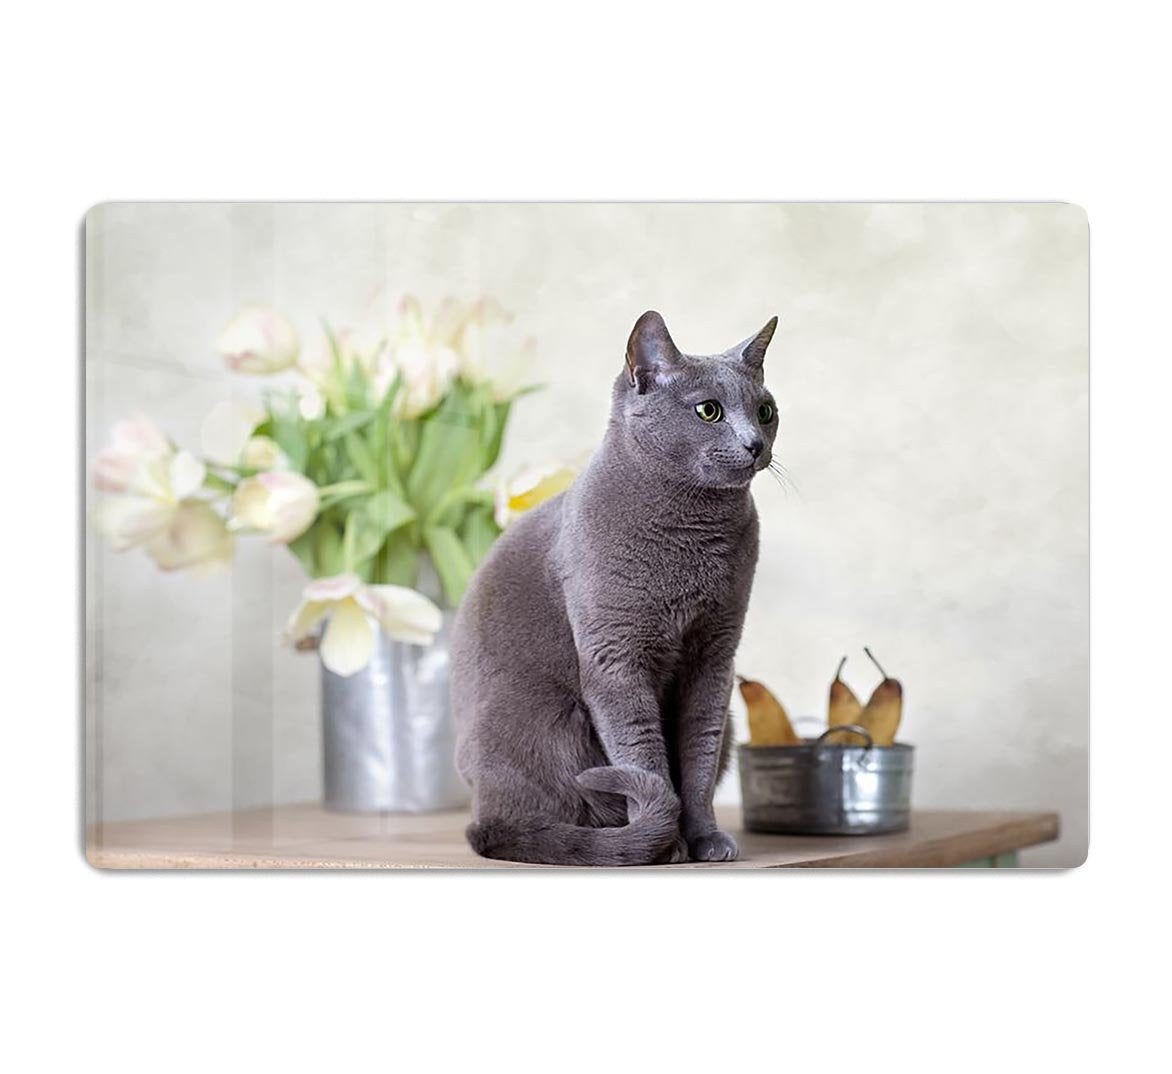 Russian Blue cat sitting on table with pears and tulips HD Metal Print - Canvas Art Rocks - 1